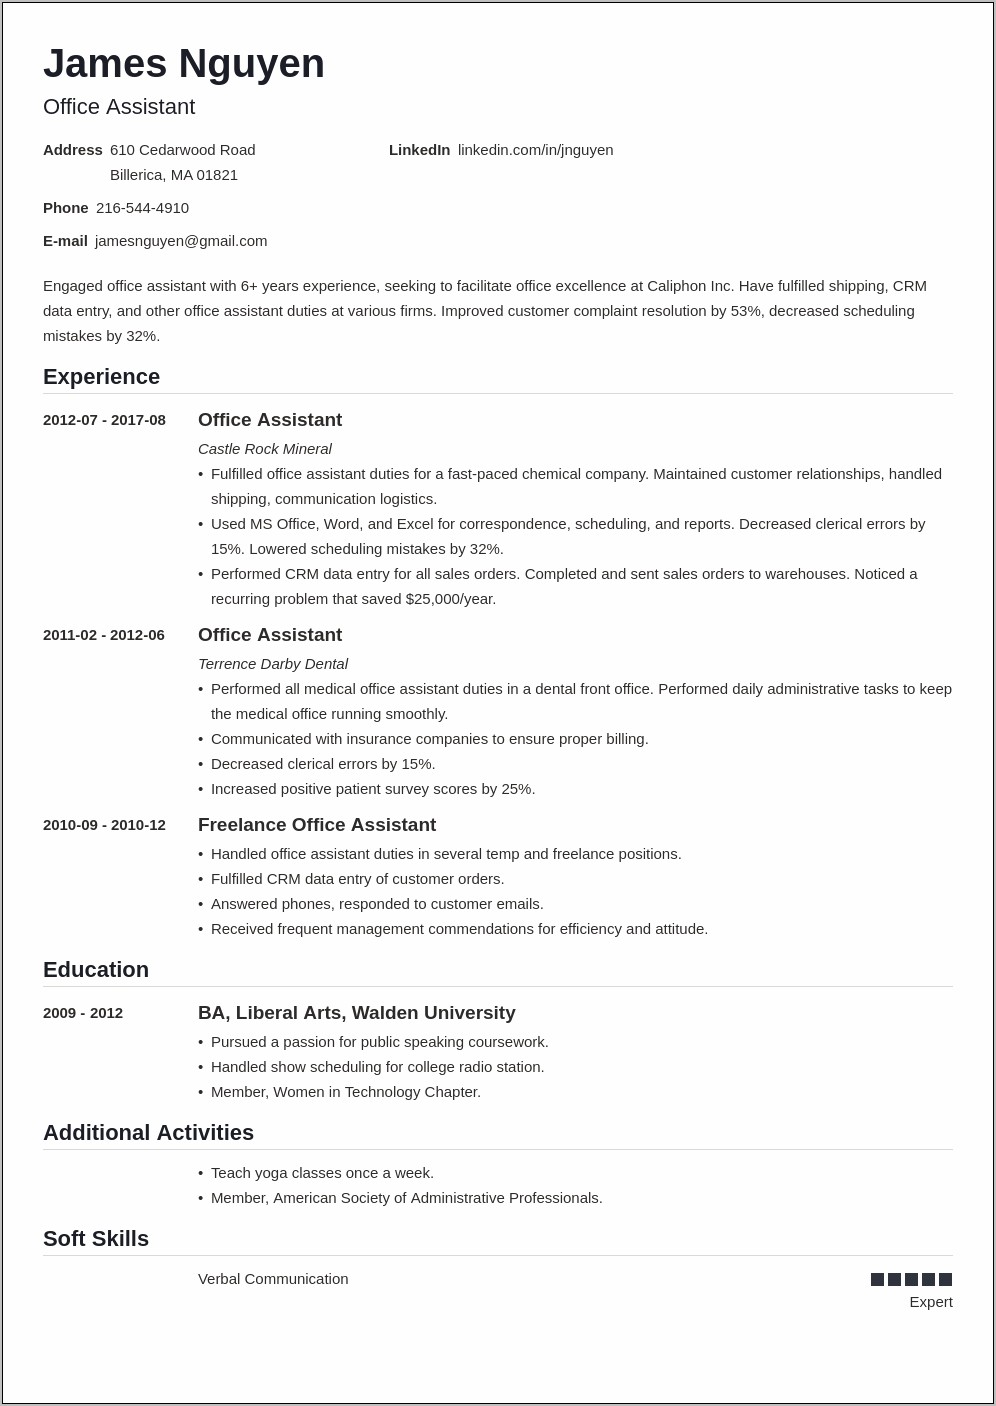 Office Assistant Sample Resume Objective